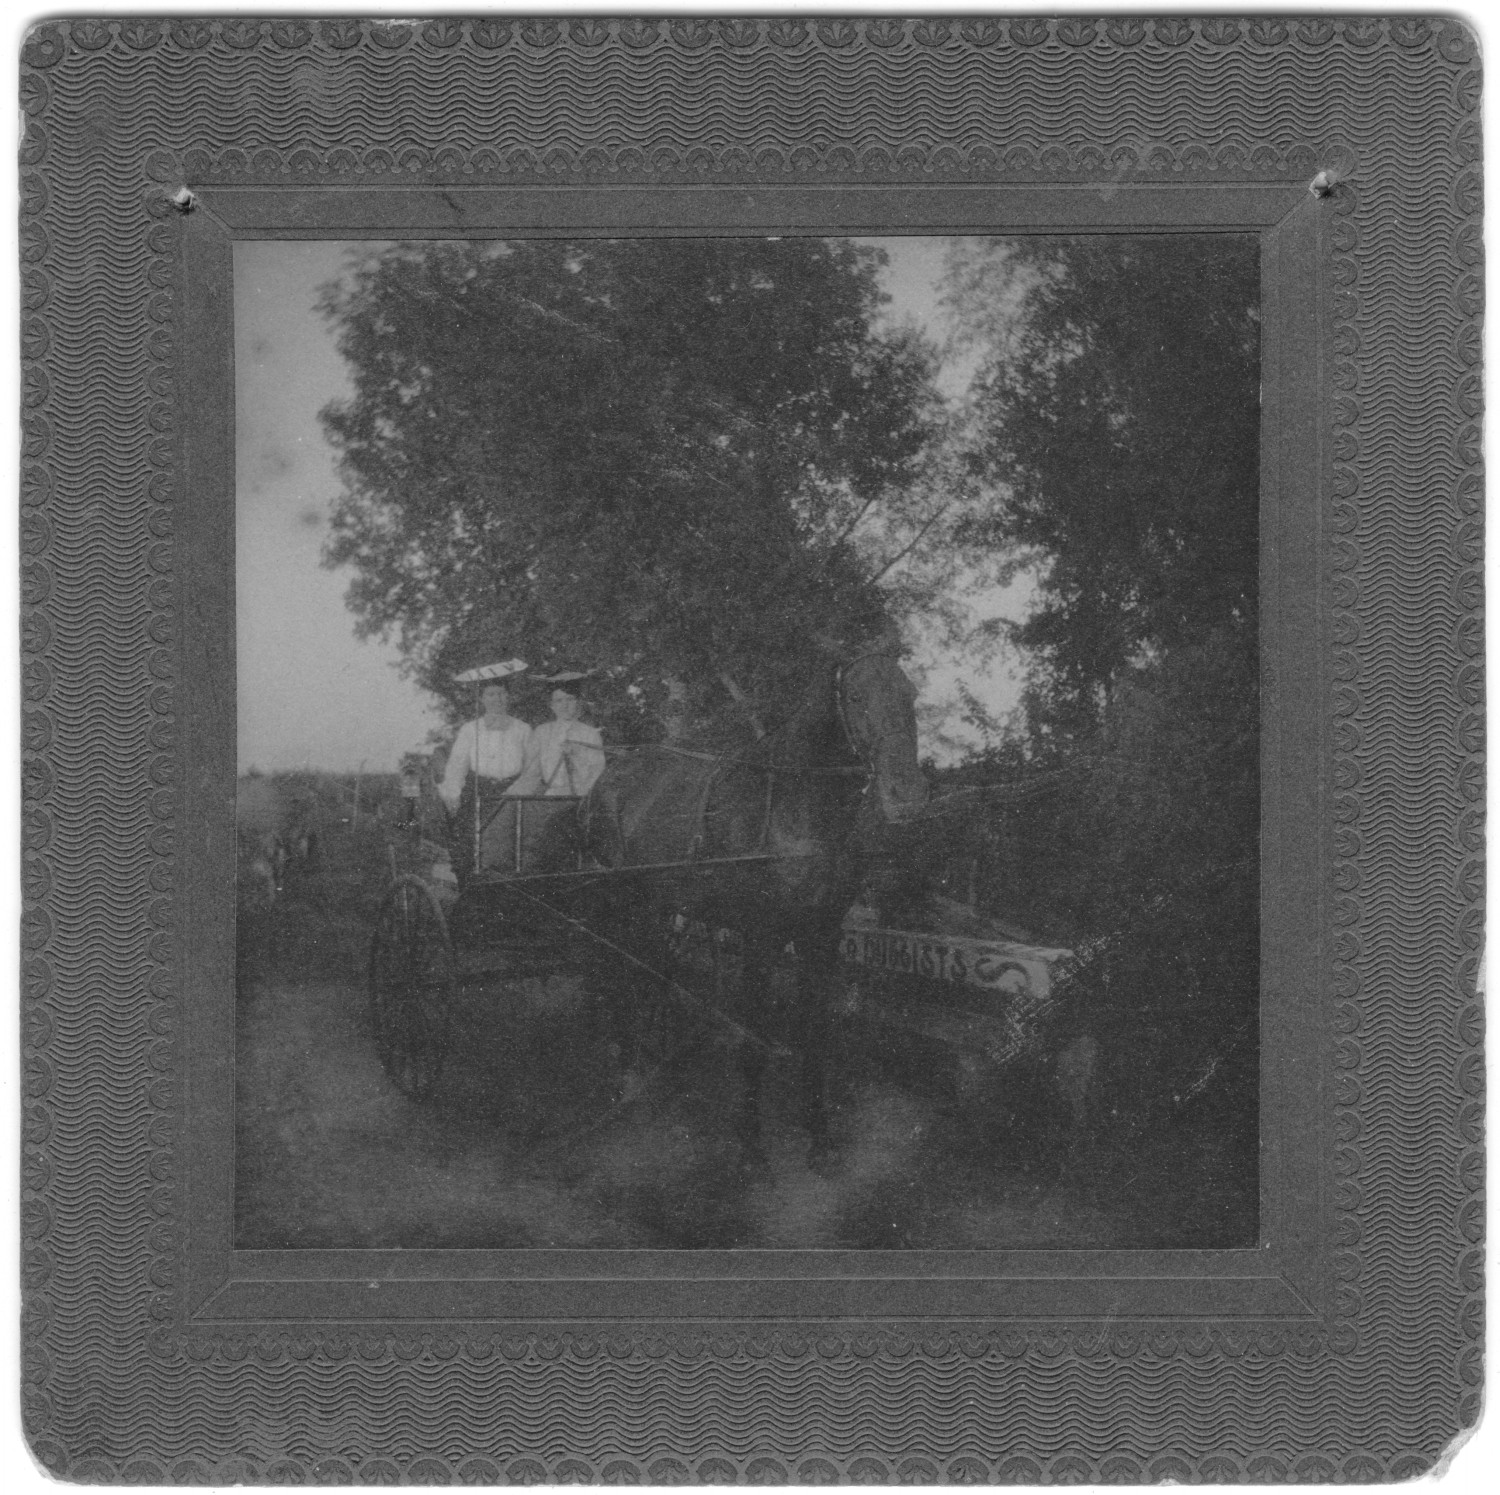 Two Women in a Horse Drawn Cart
                                                
                                                    [Sequence #]: 1 of 1
                                                